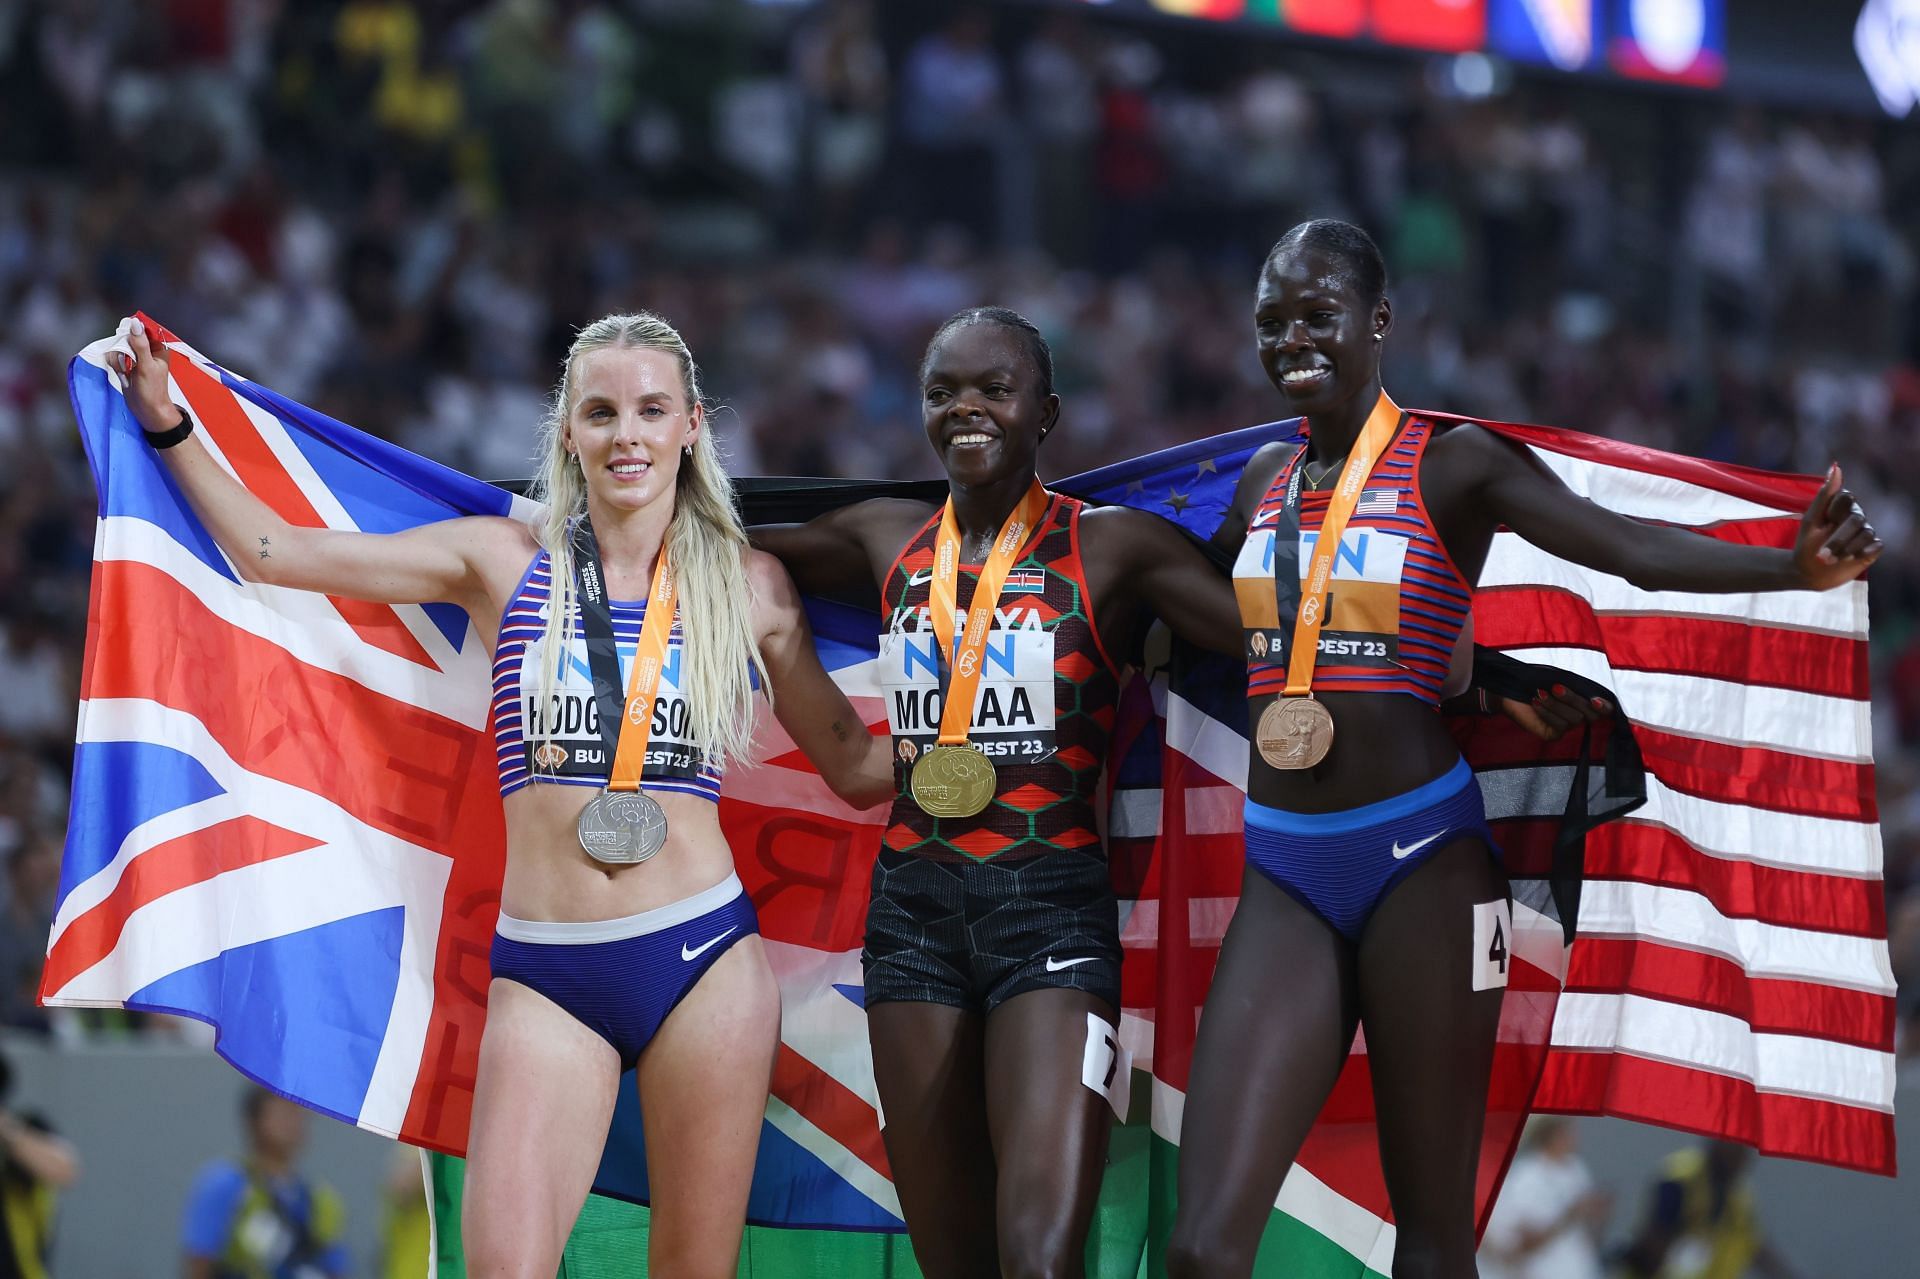 Silver medalist Keely Hodgkinson of Team Great Britain, gold medalist Mary Moraa of Team Kenya and bronze medalist Athing Mu of Team United States during Day 9 of the 2023 World Athletics Championships 